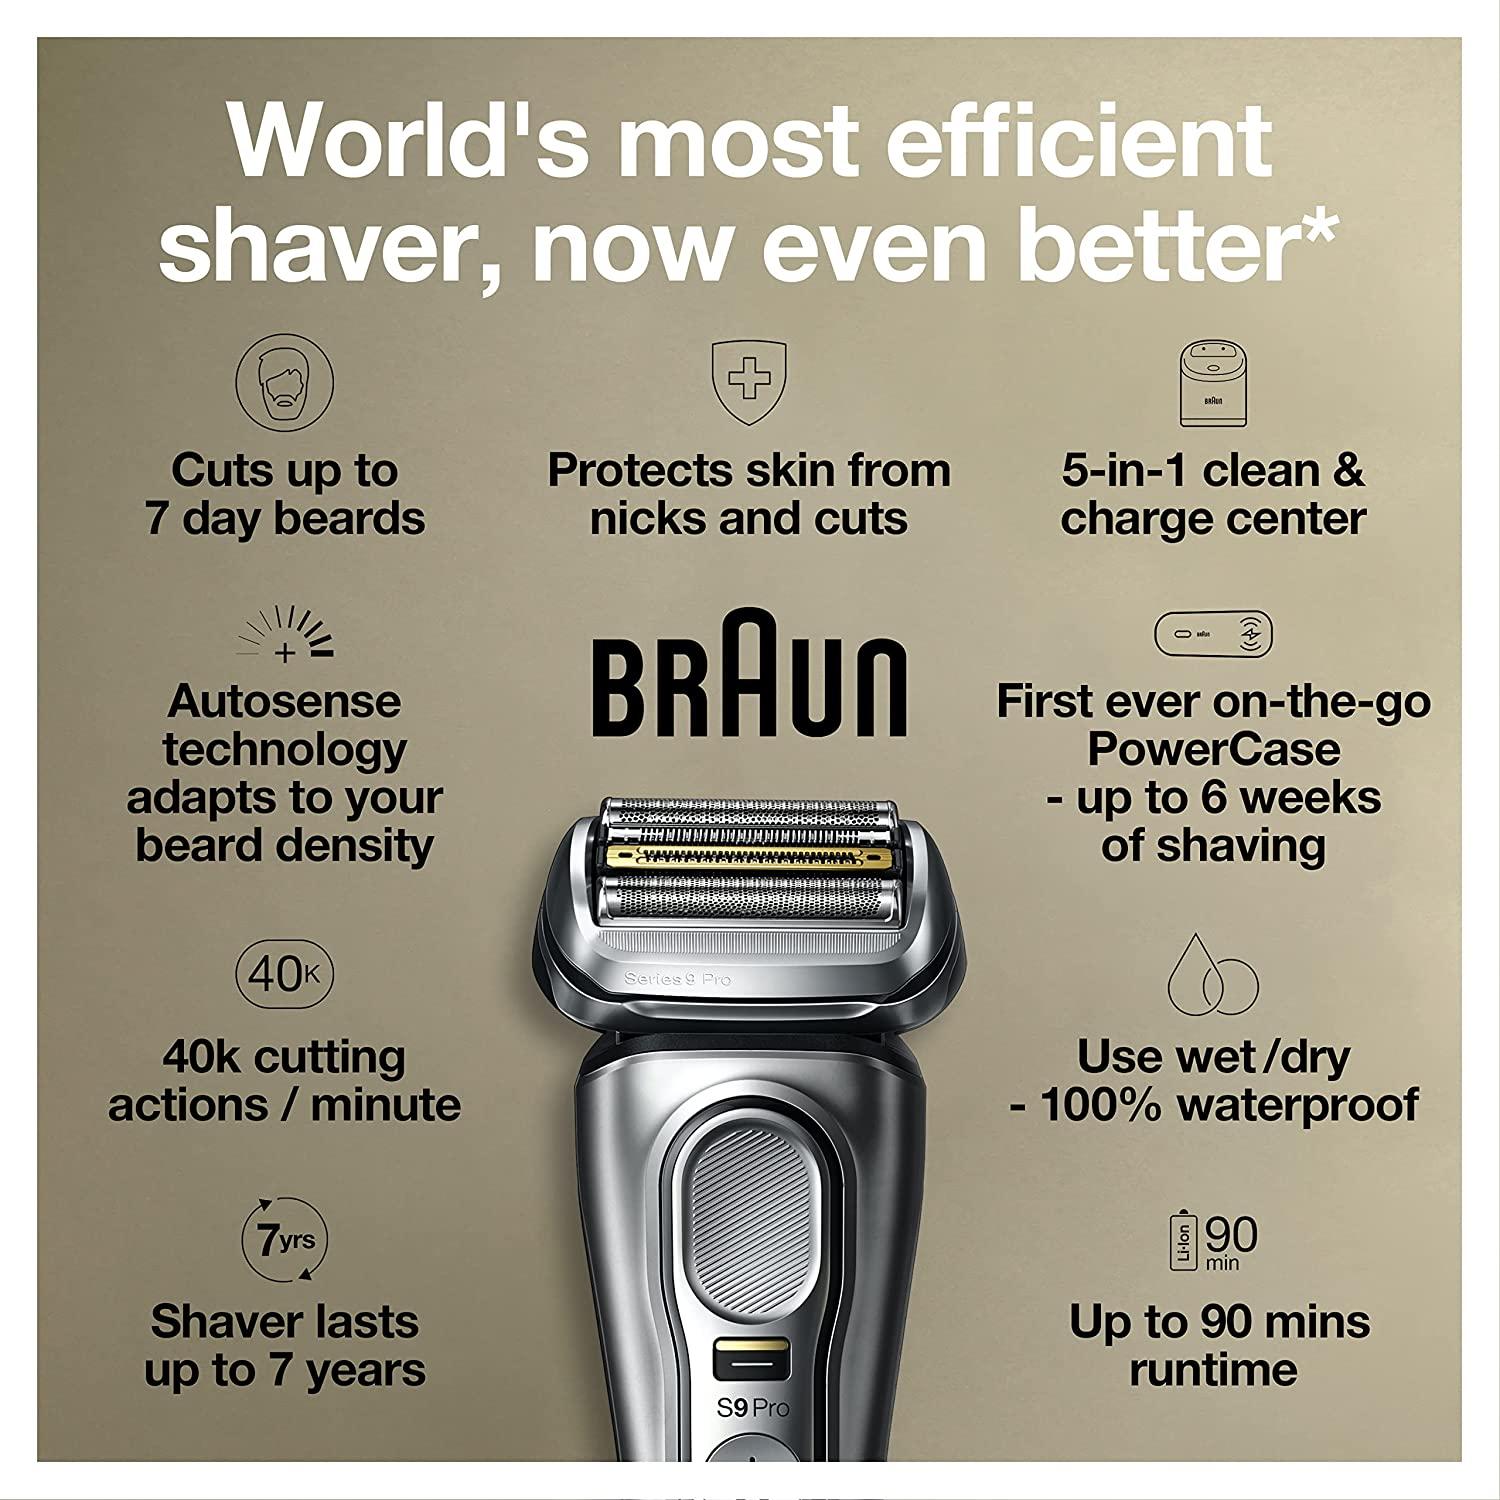 Braun Electric Razor for Men, Waterproof Foil Shaver, Series 9 Pro 9477cc,  Wet & Dry Shave, with Portable Charging Case, ProLift Beard Trimmer, 5-in-1  Cleaning & Charging SmartCare Center, Silver .9477cc